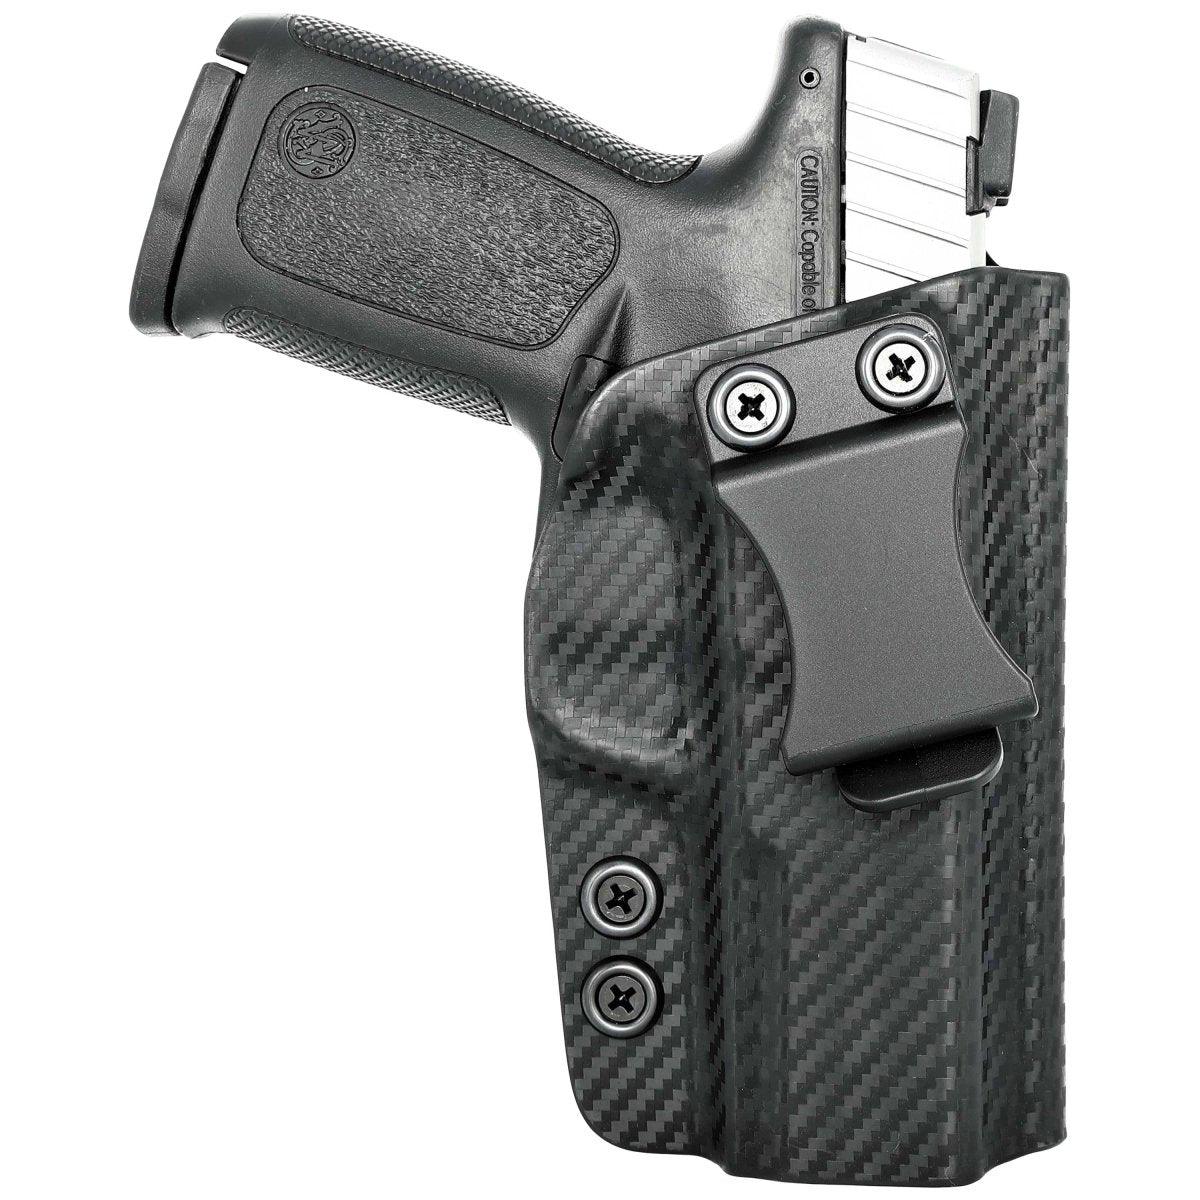 SD40VE HOLSTERS